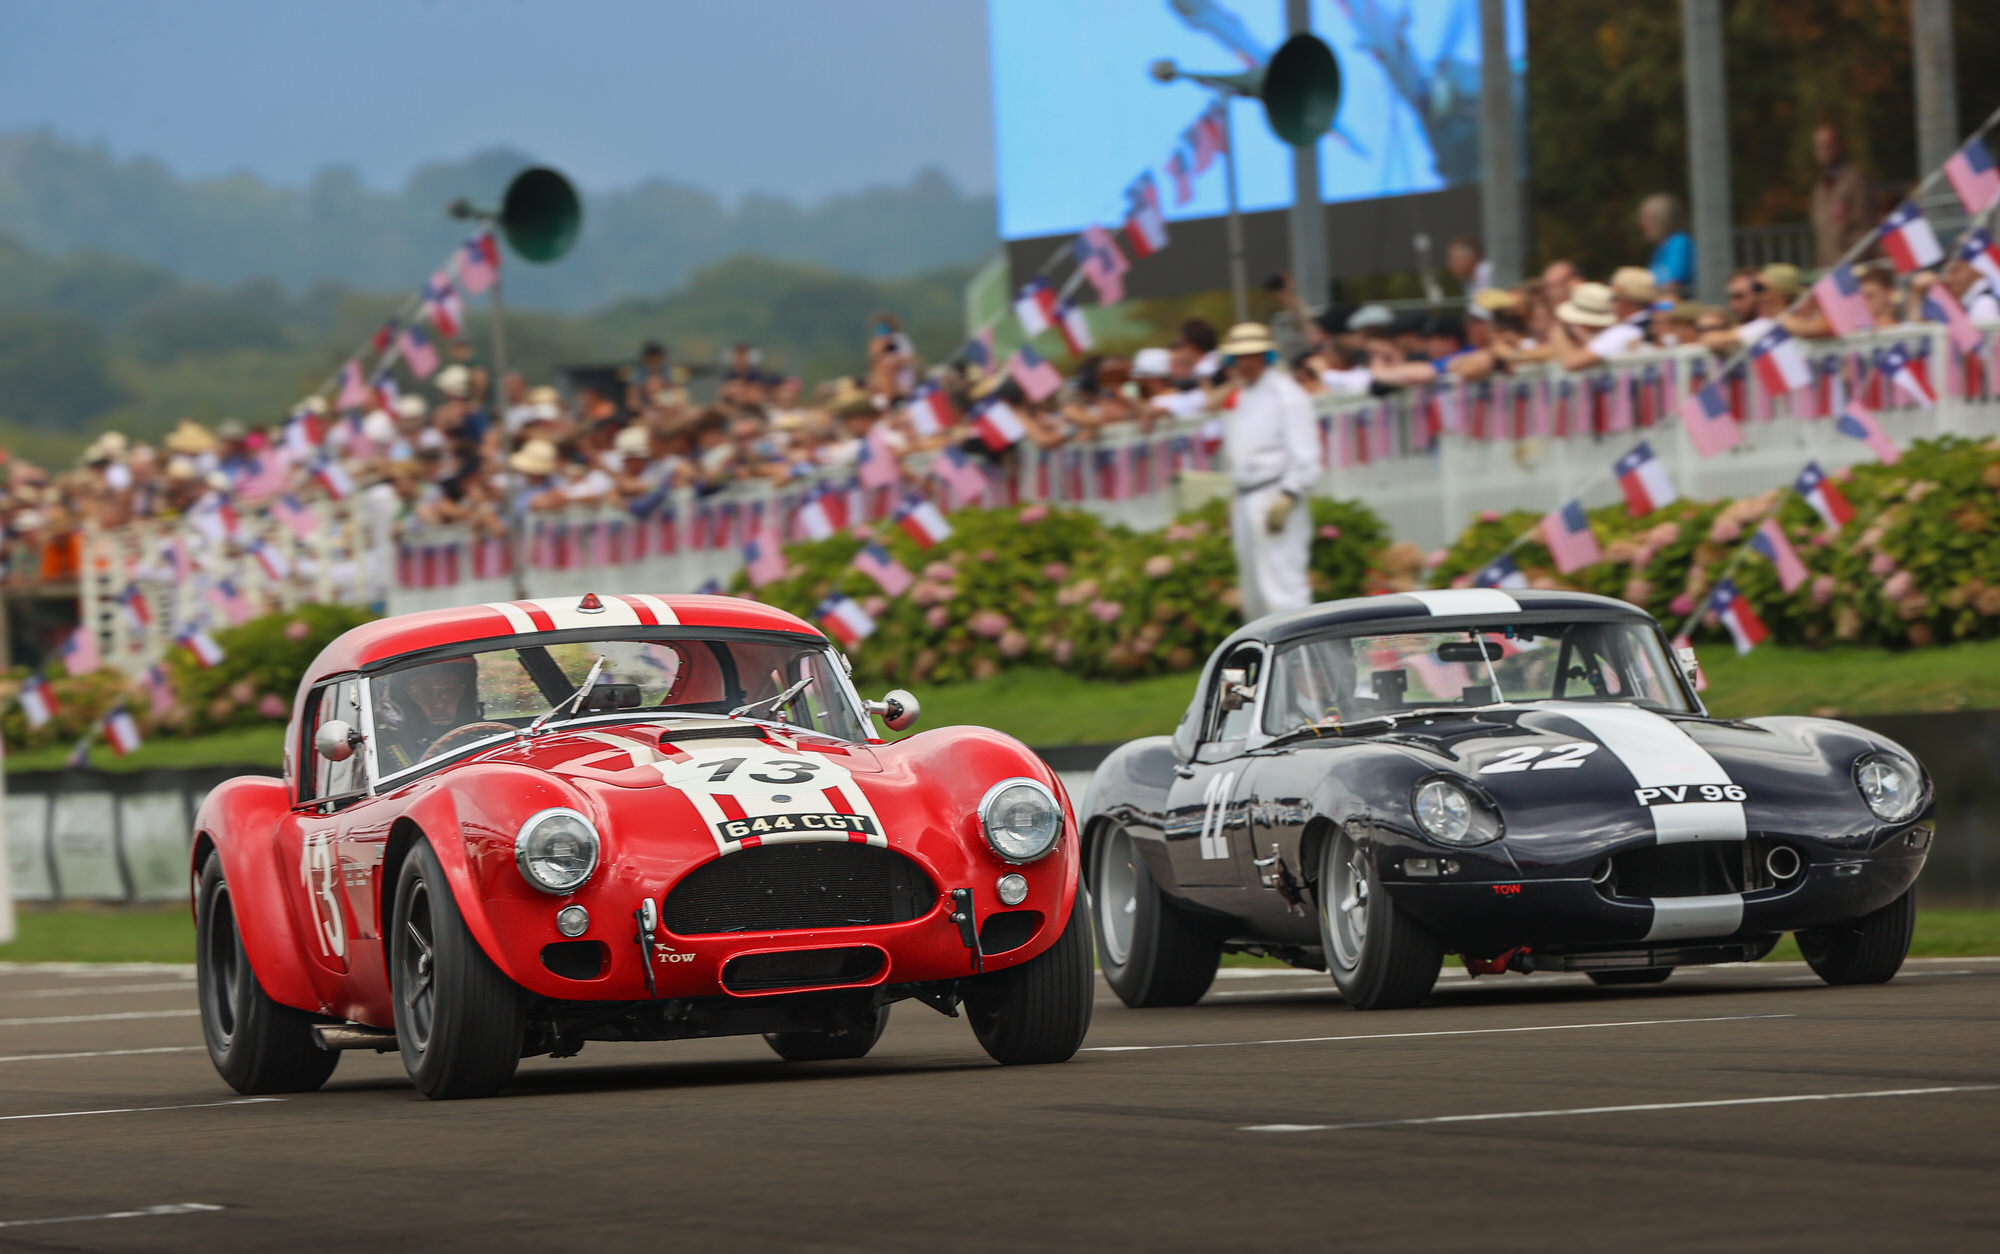 Goodwood Revival 2023 - "The Greatest Show on Earth" - Part 1